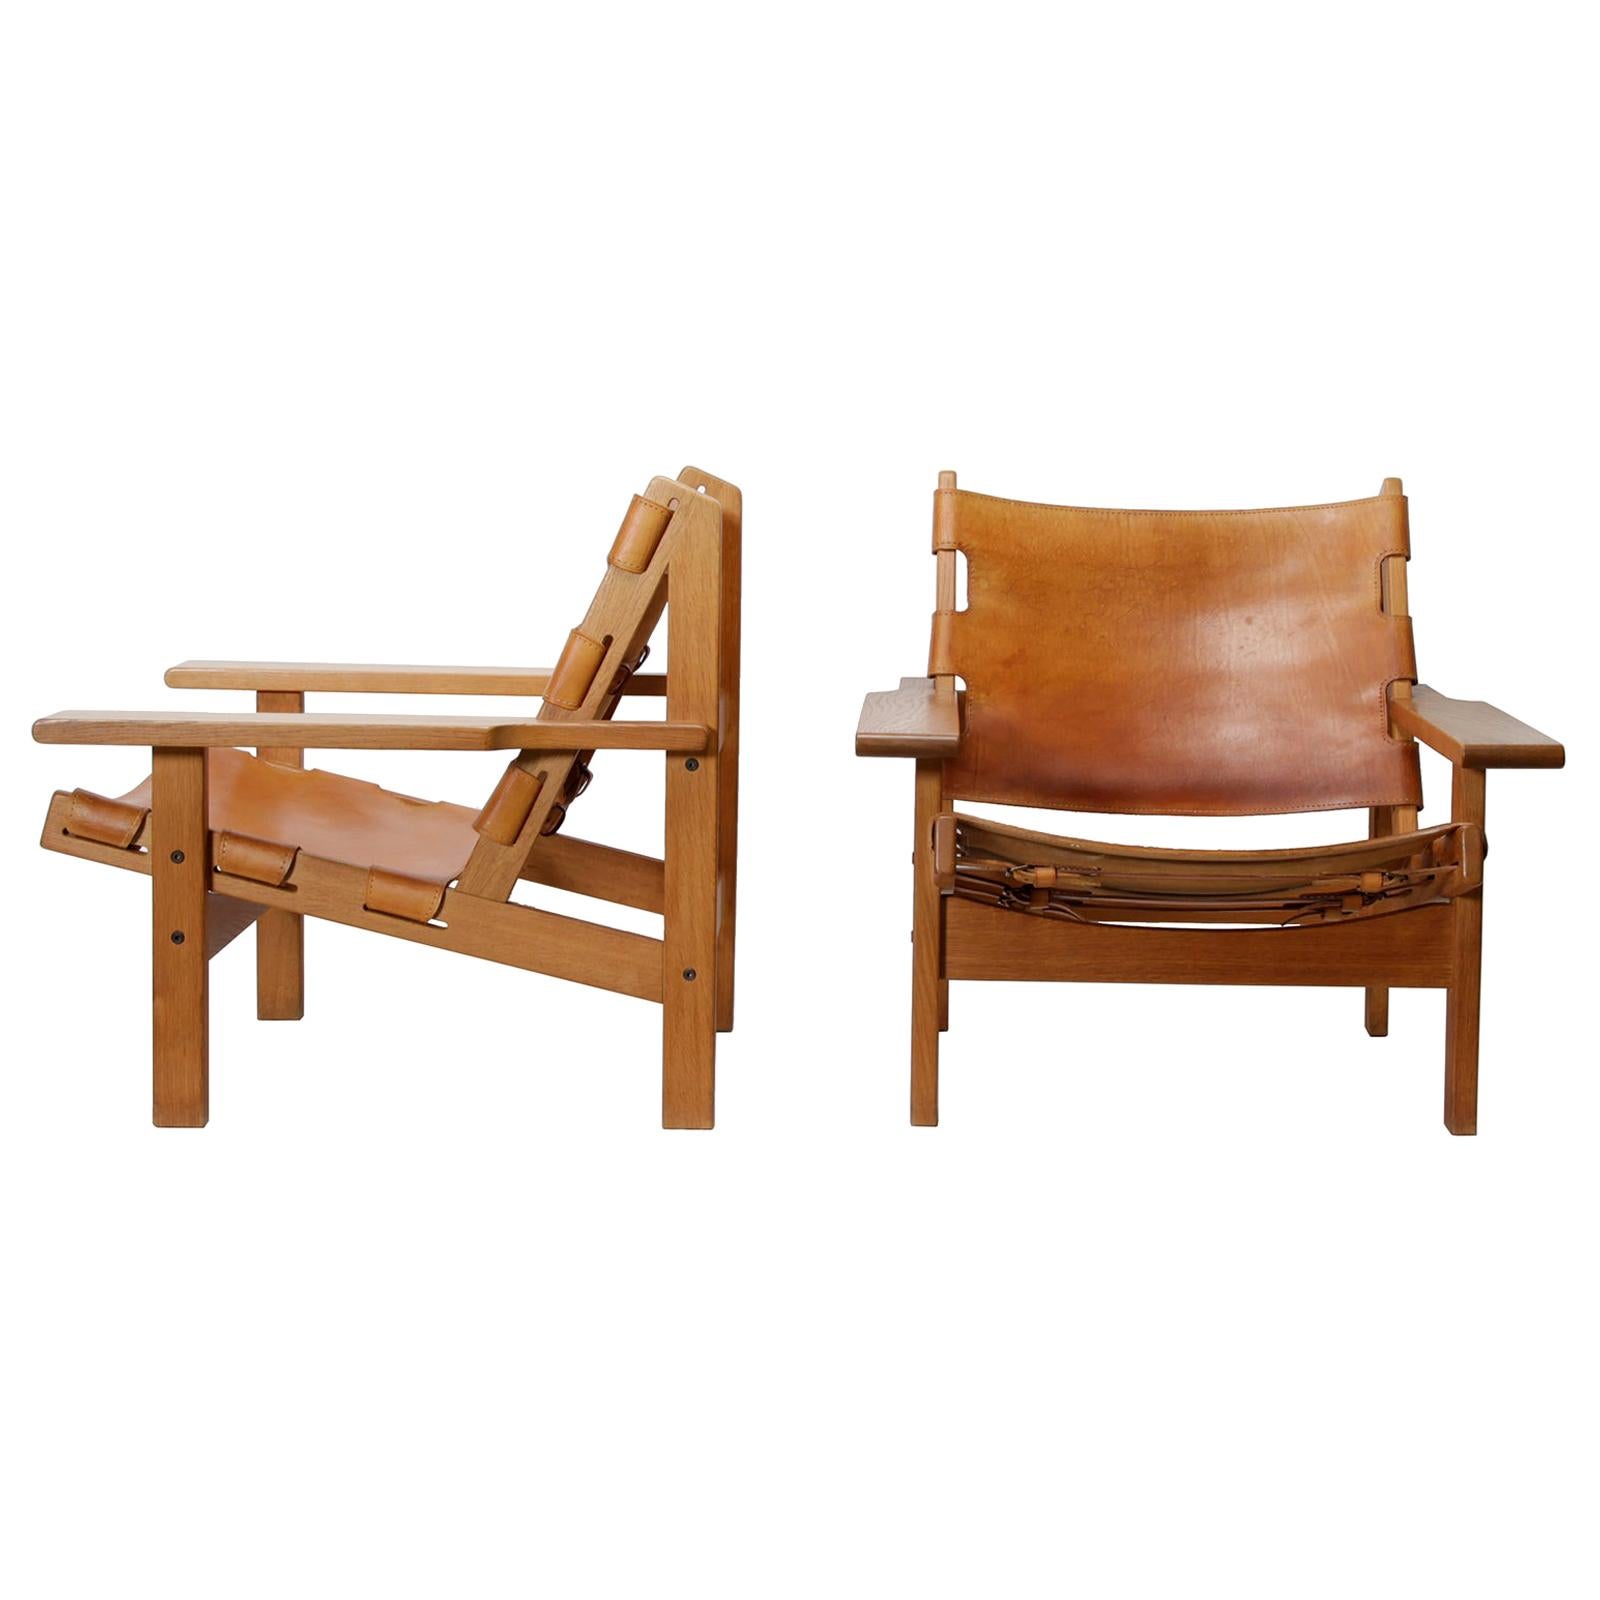 Pair of Danish Hunting Chairs in Oak and Saddle Leather by Kurt Østervig